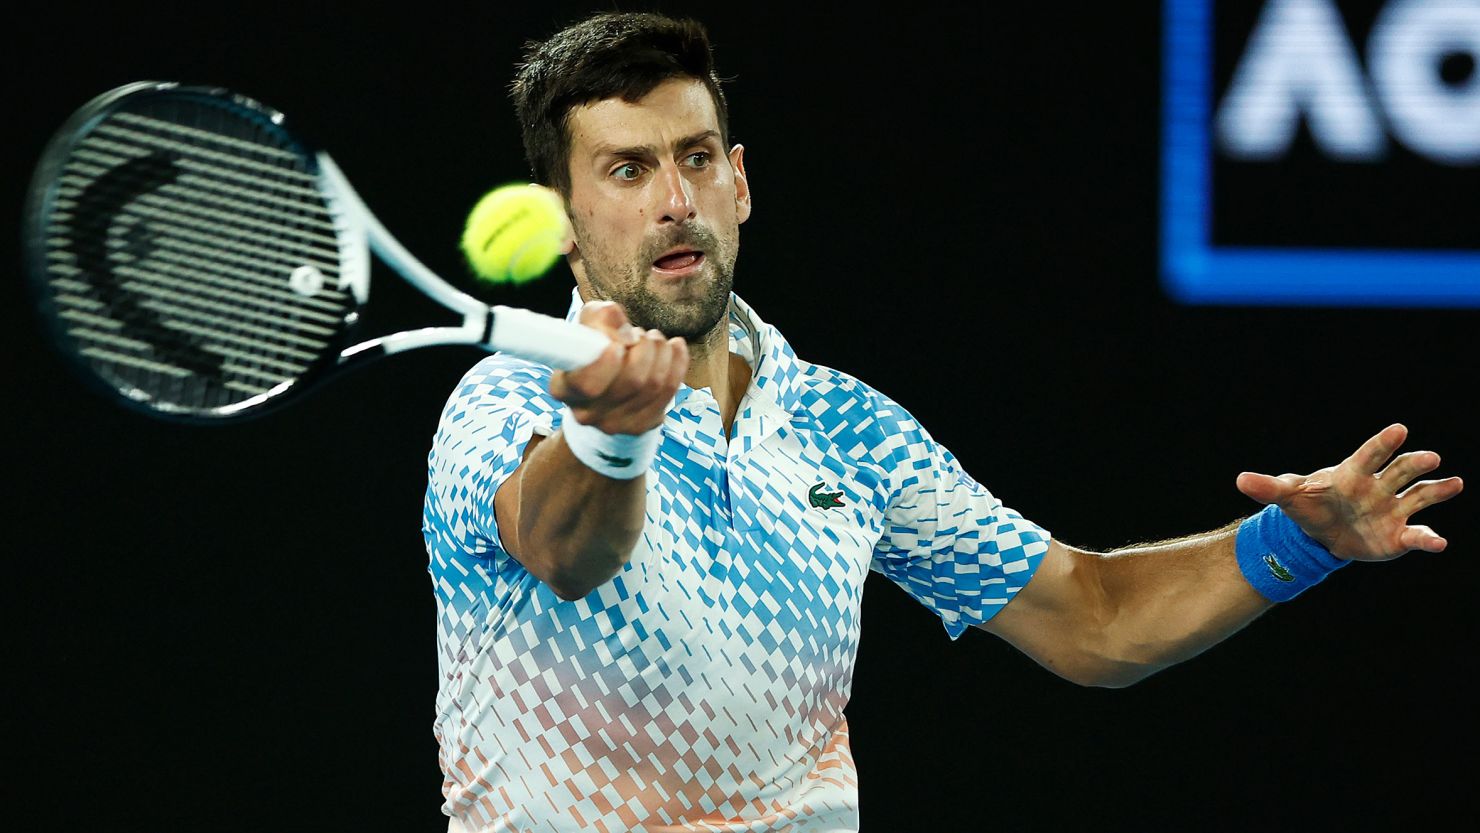 Djokovic returned to the world No. 1 position when he won a record 10th Australian Open in January.